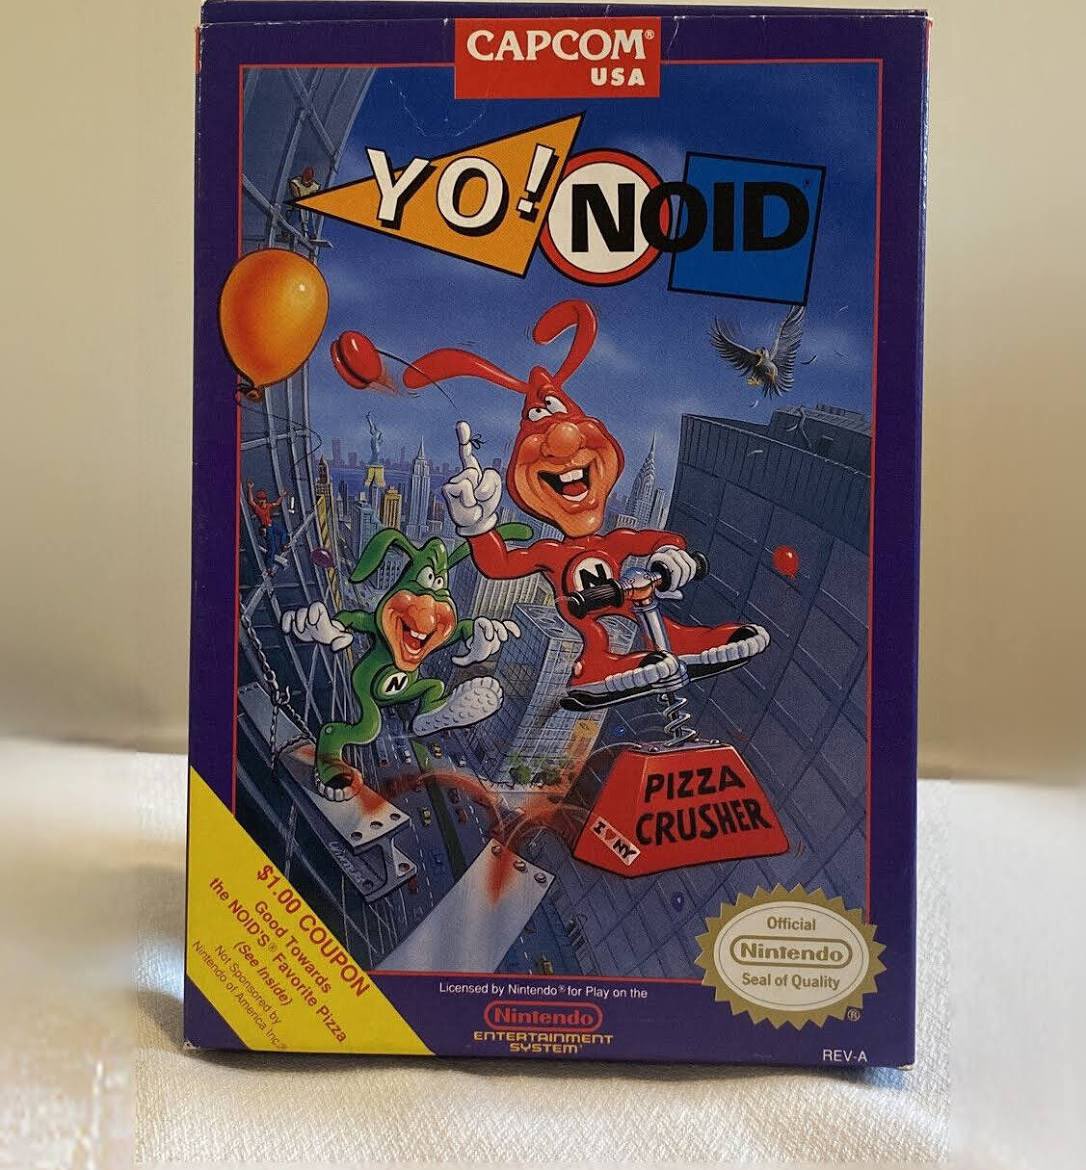 Real ones know…
…that this isn’t a good game. Still fun, though. Except the ice level. #yonoid